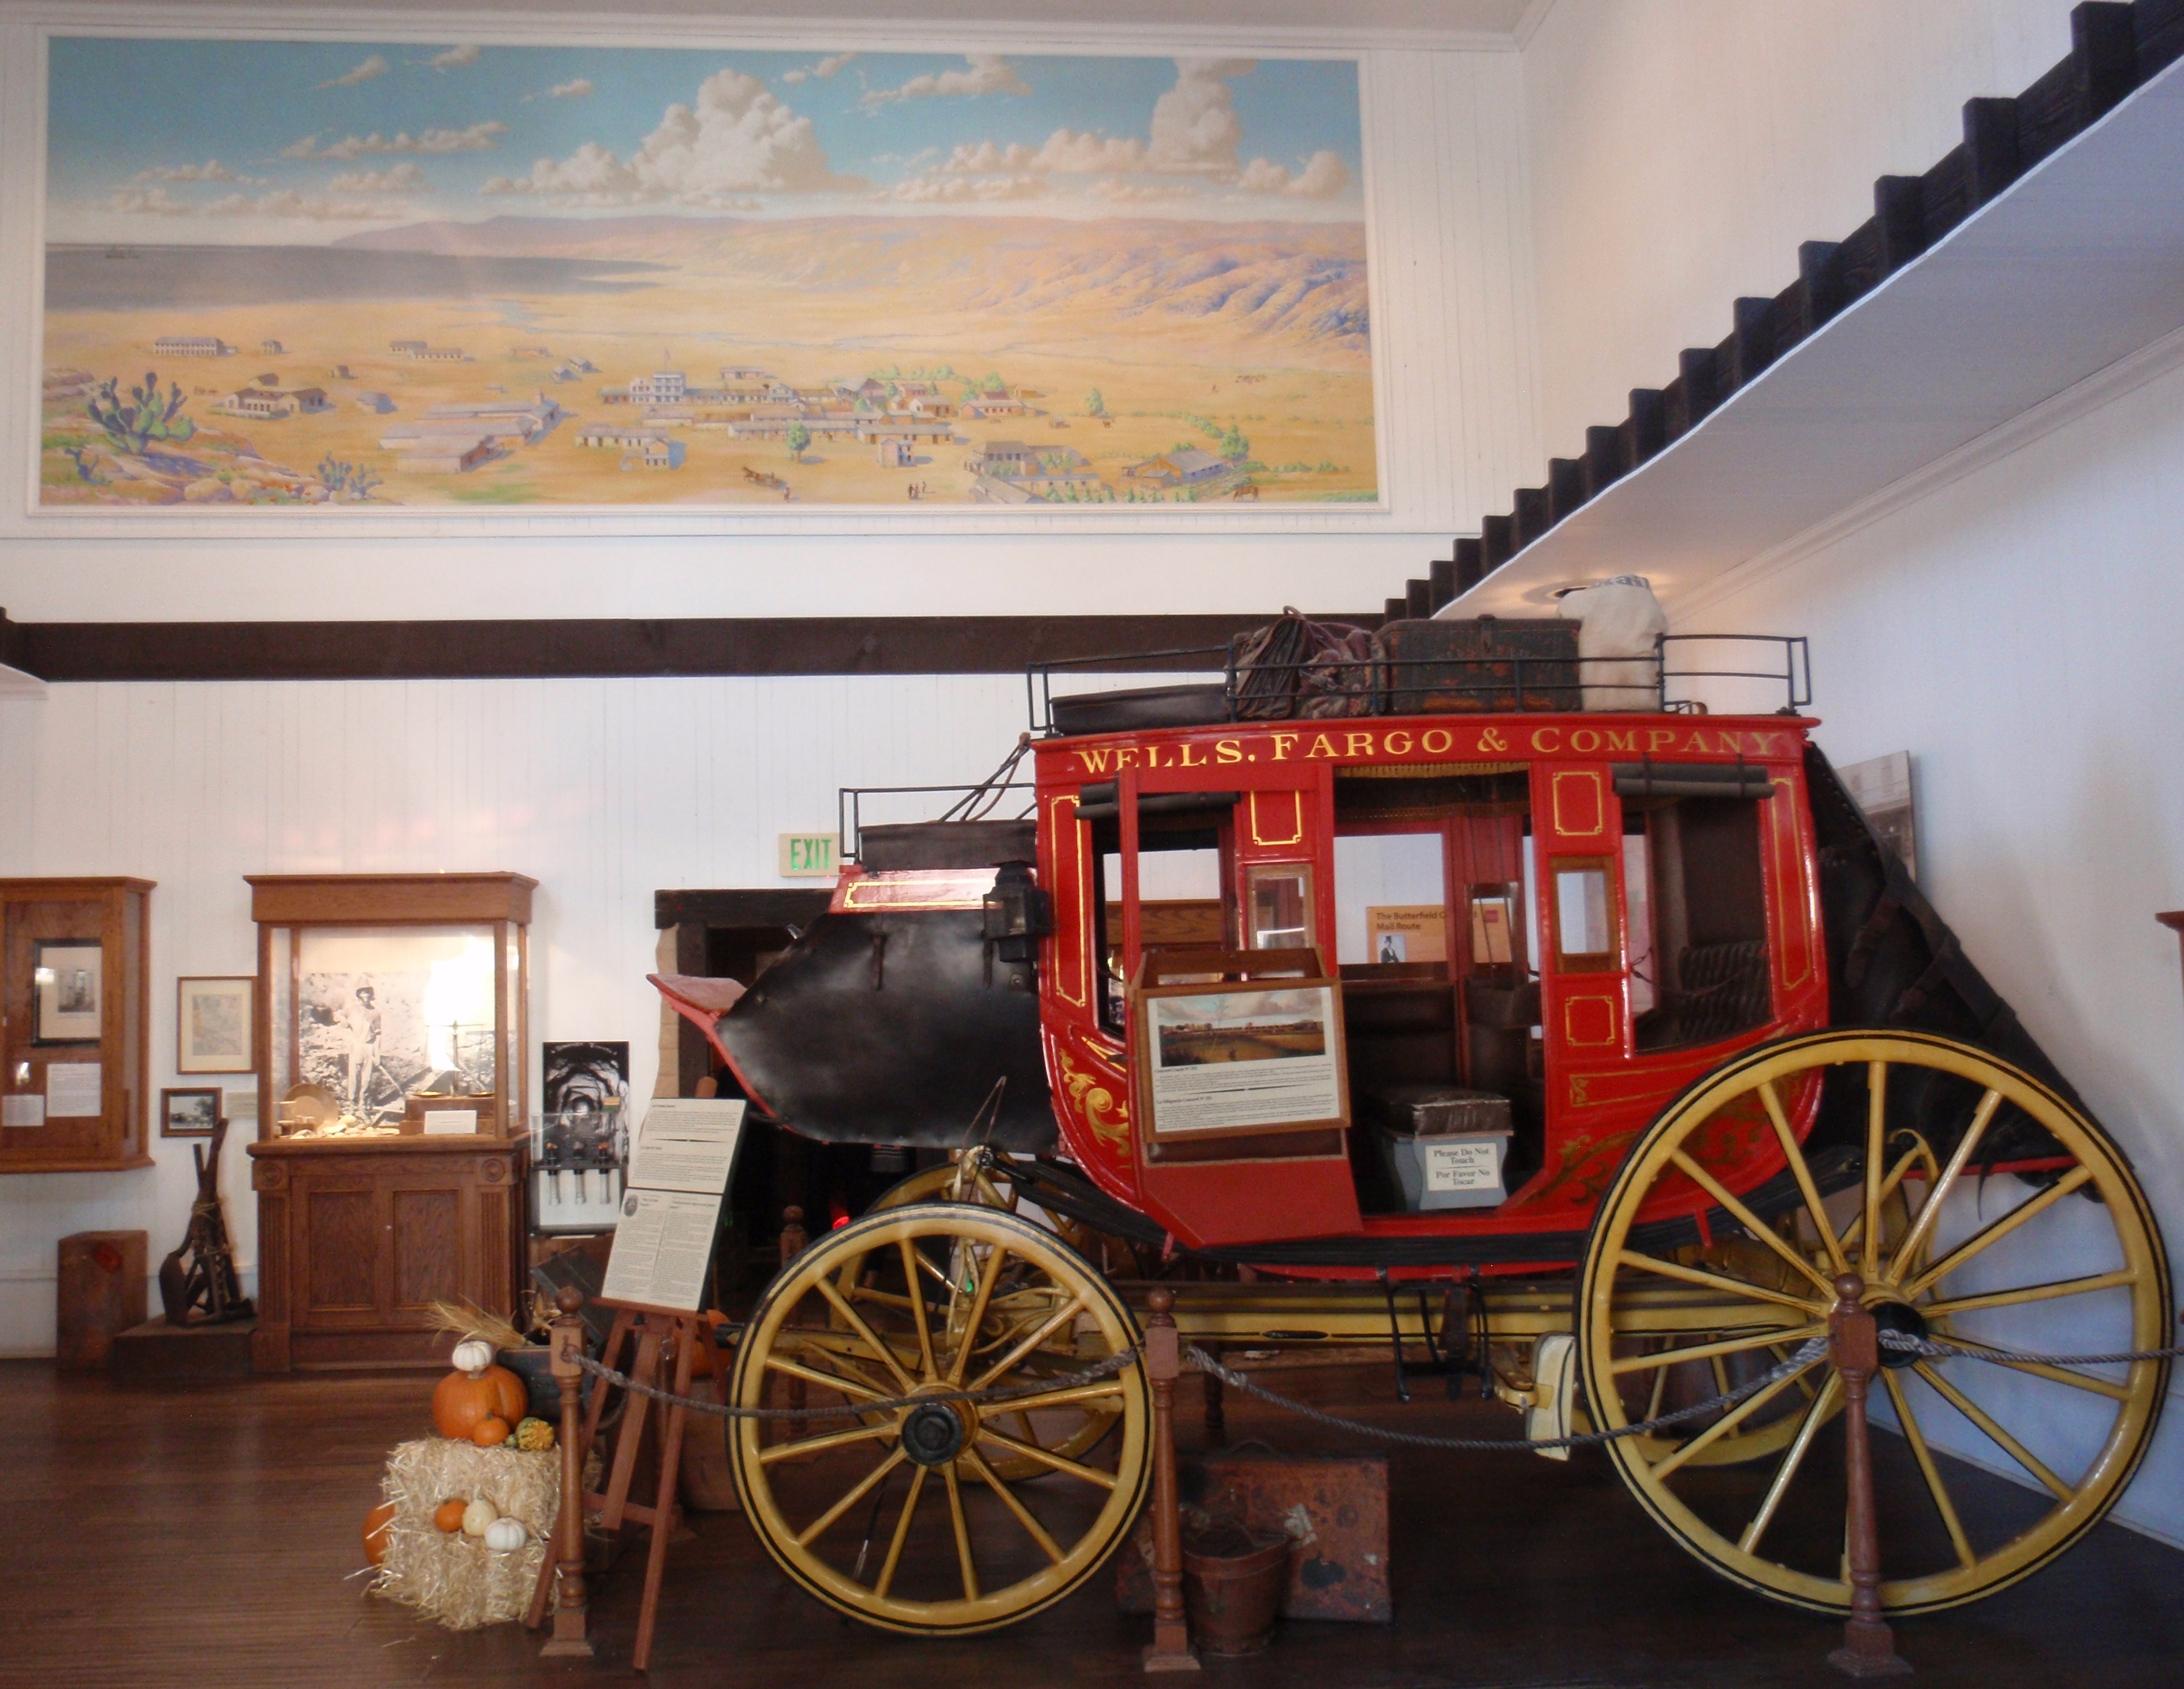 Concord stage coach at Wells Fargo museum in San Diego. Painting at top is of Old Town San Diego in its prime time. Photo by James Ulvog.